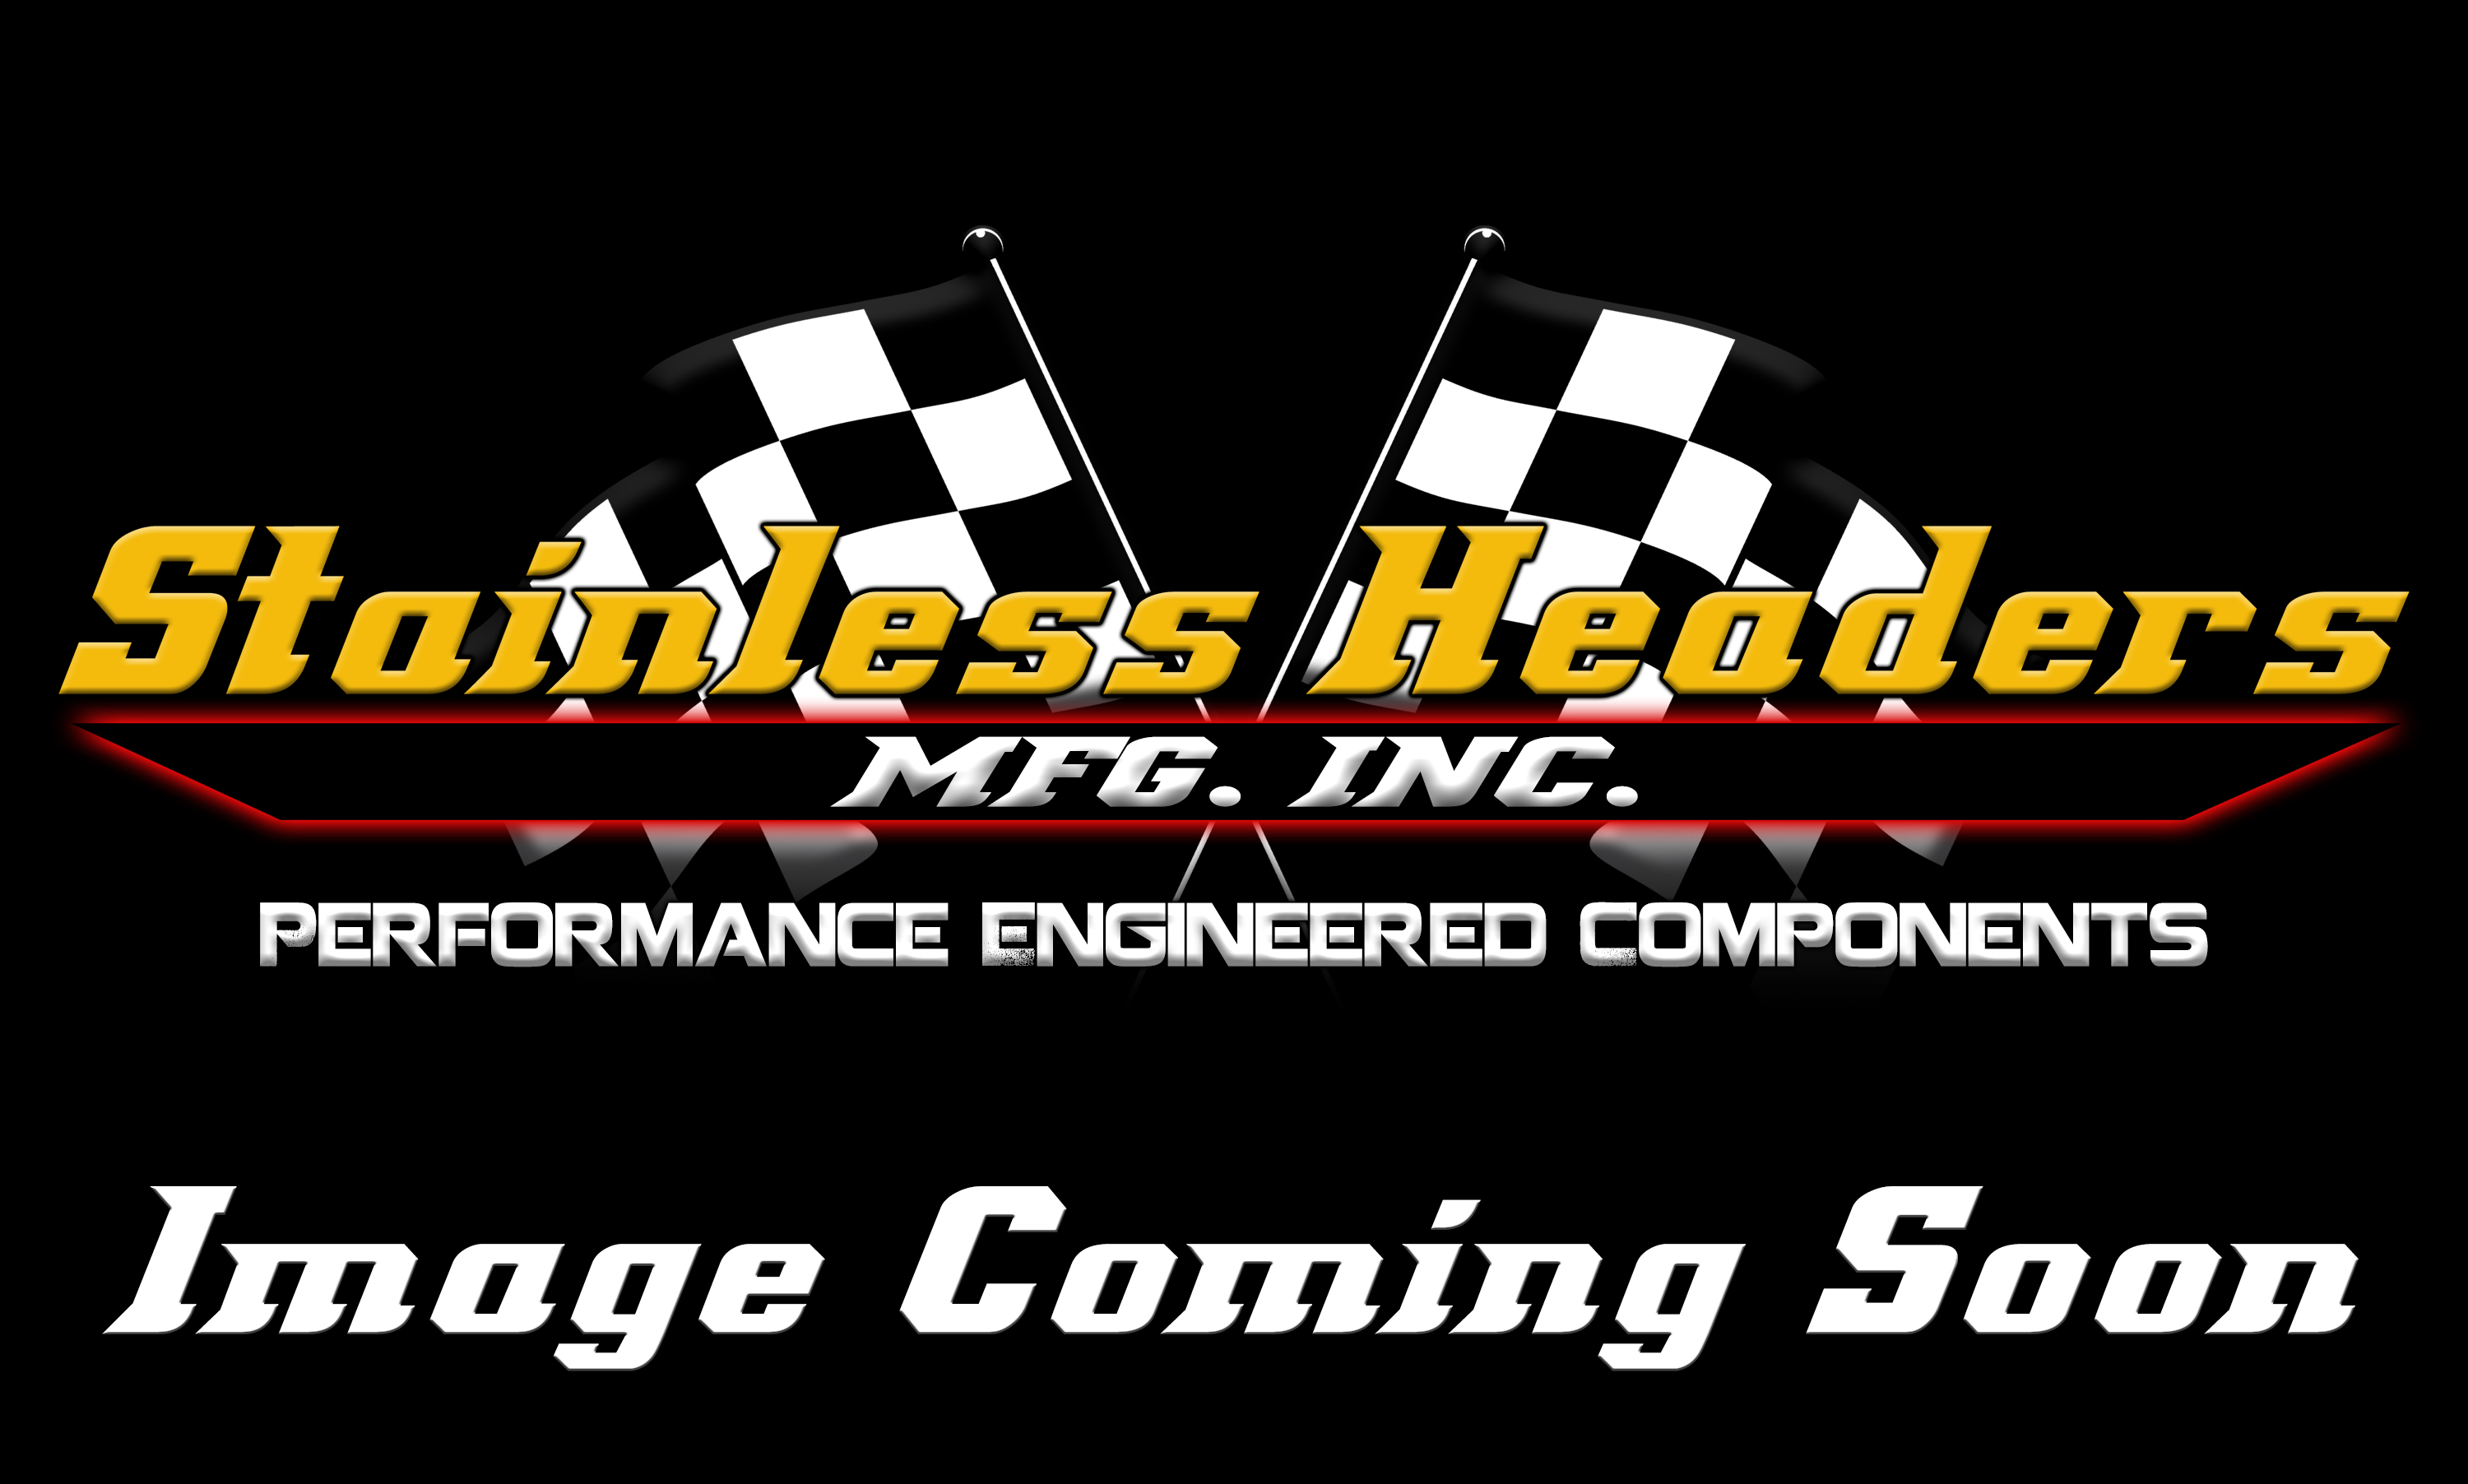 Stainless Headers - 2 1/8" Primary 5 into 1 Performance Merge Collector-16ga 321ss